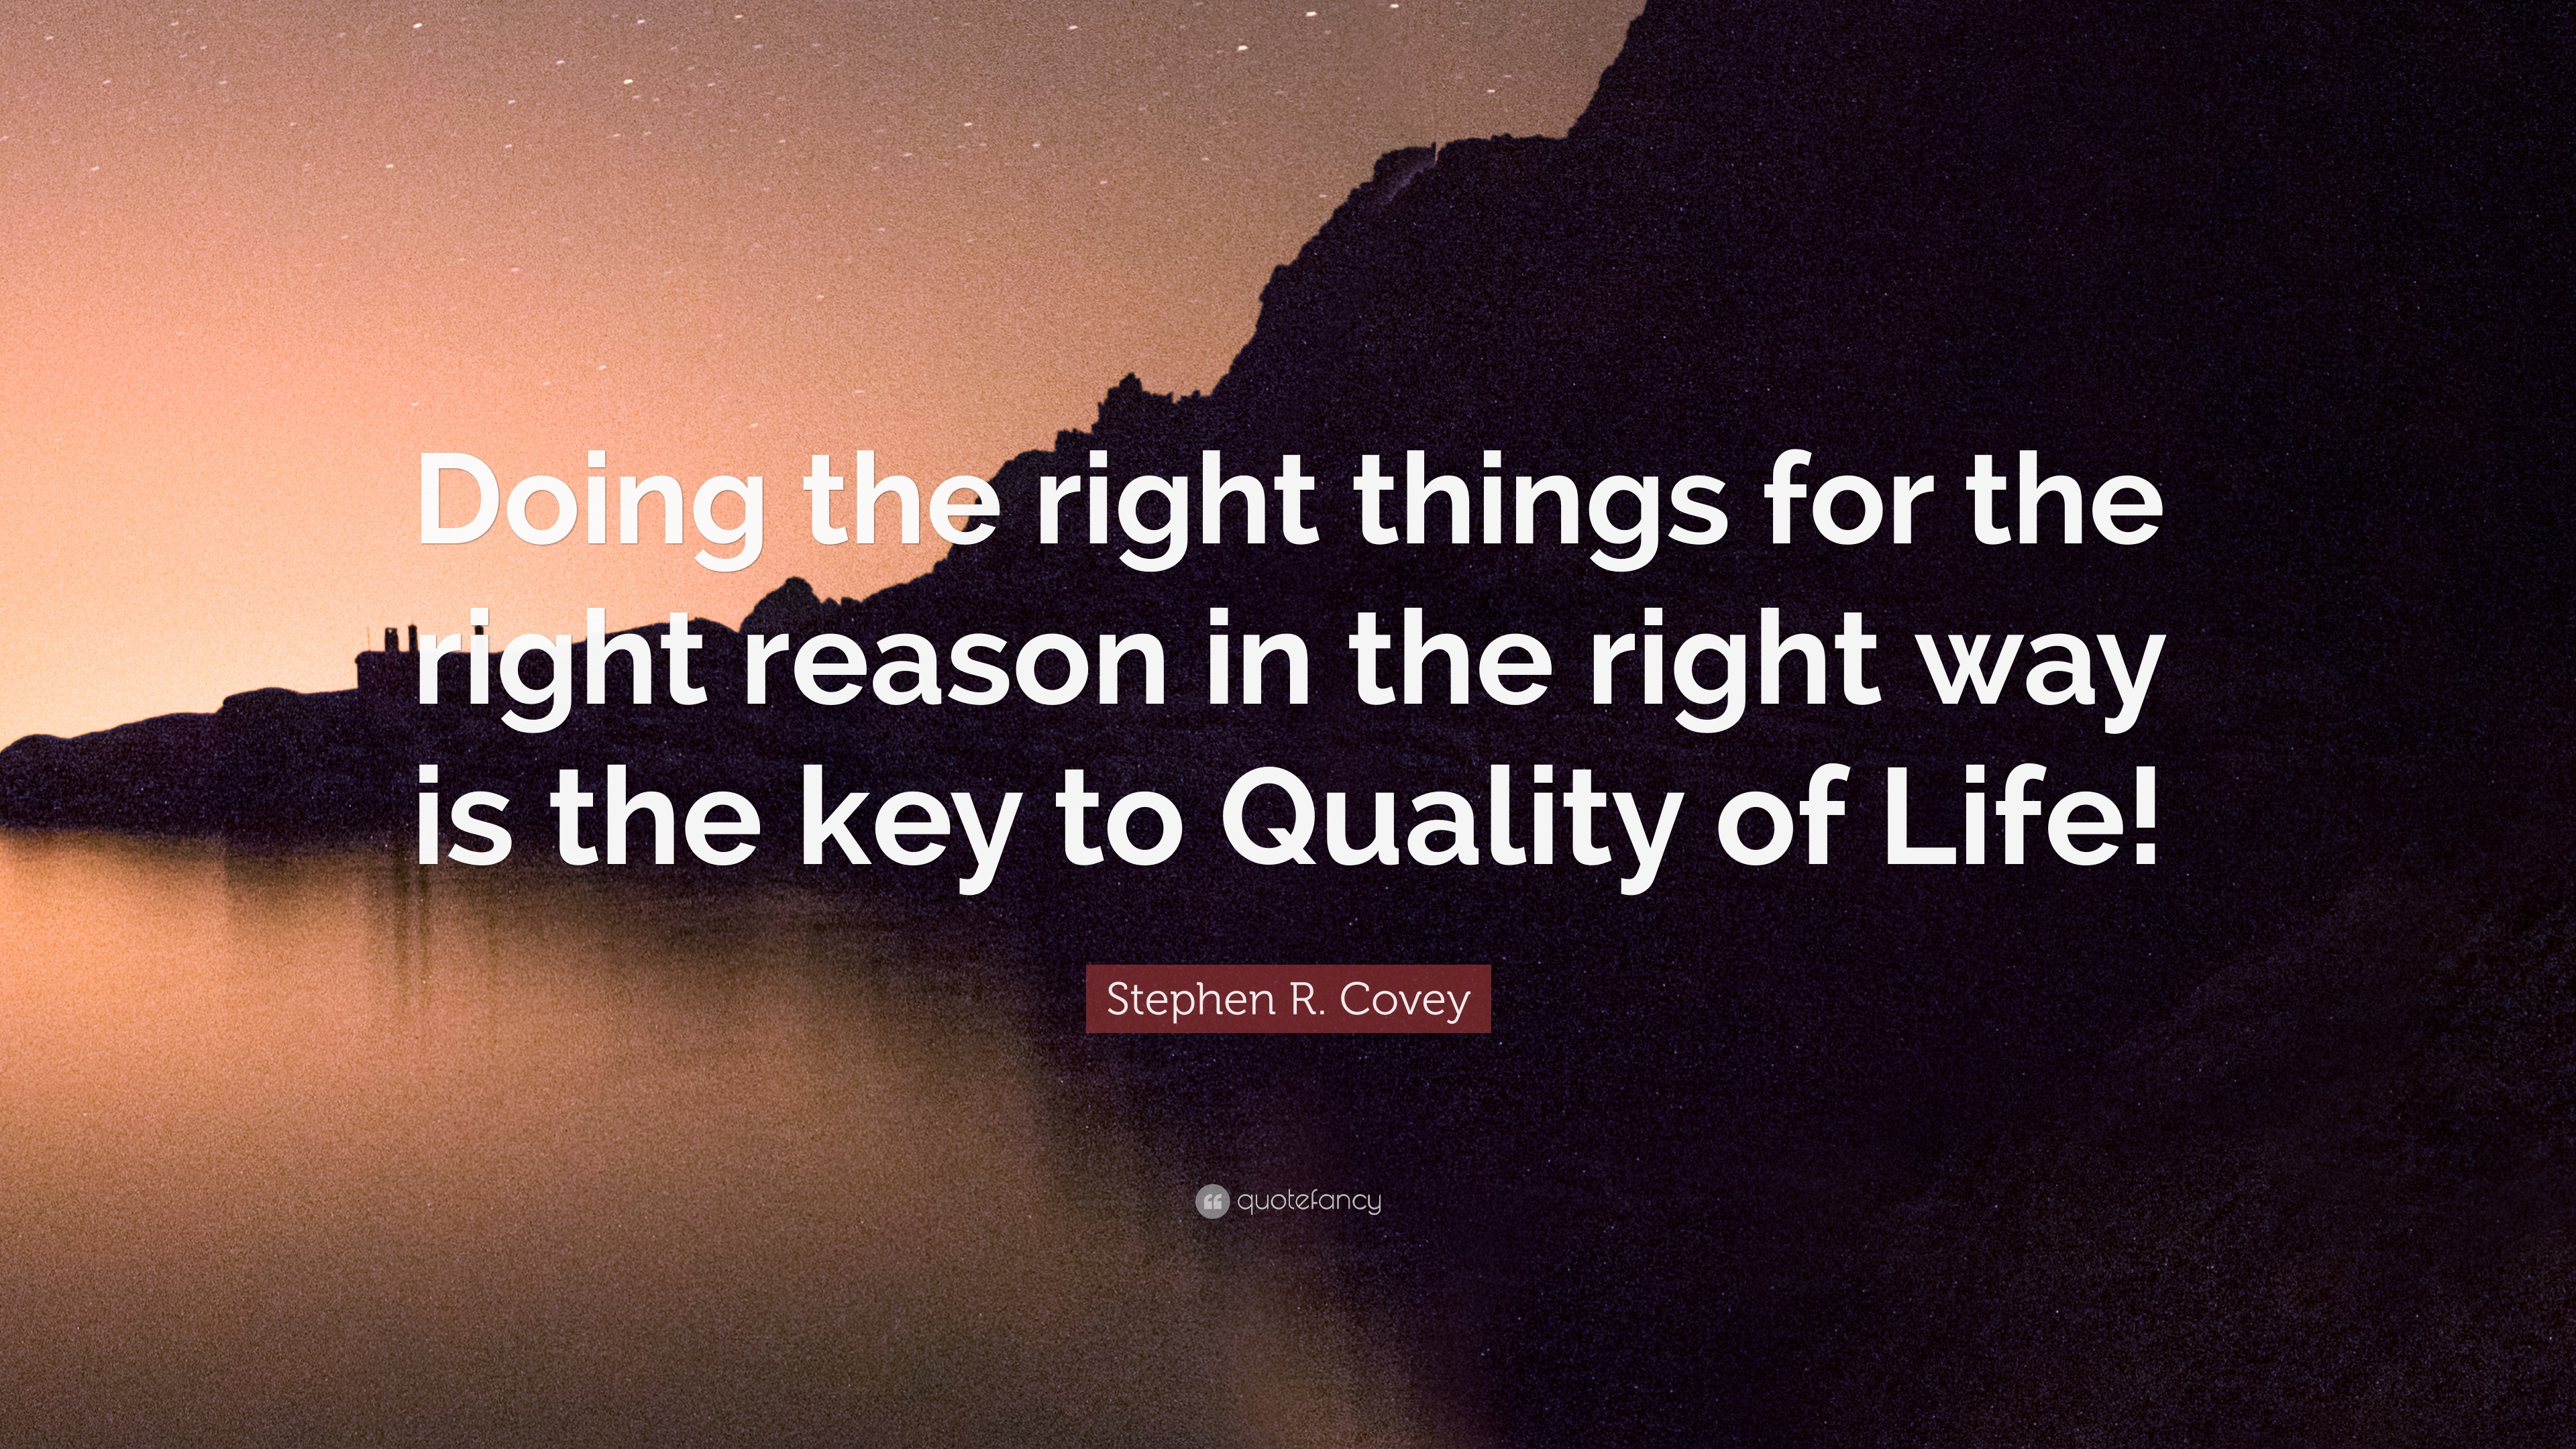 Stephen R. Covey Quote “Doing the right things for the